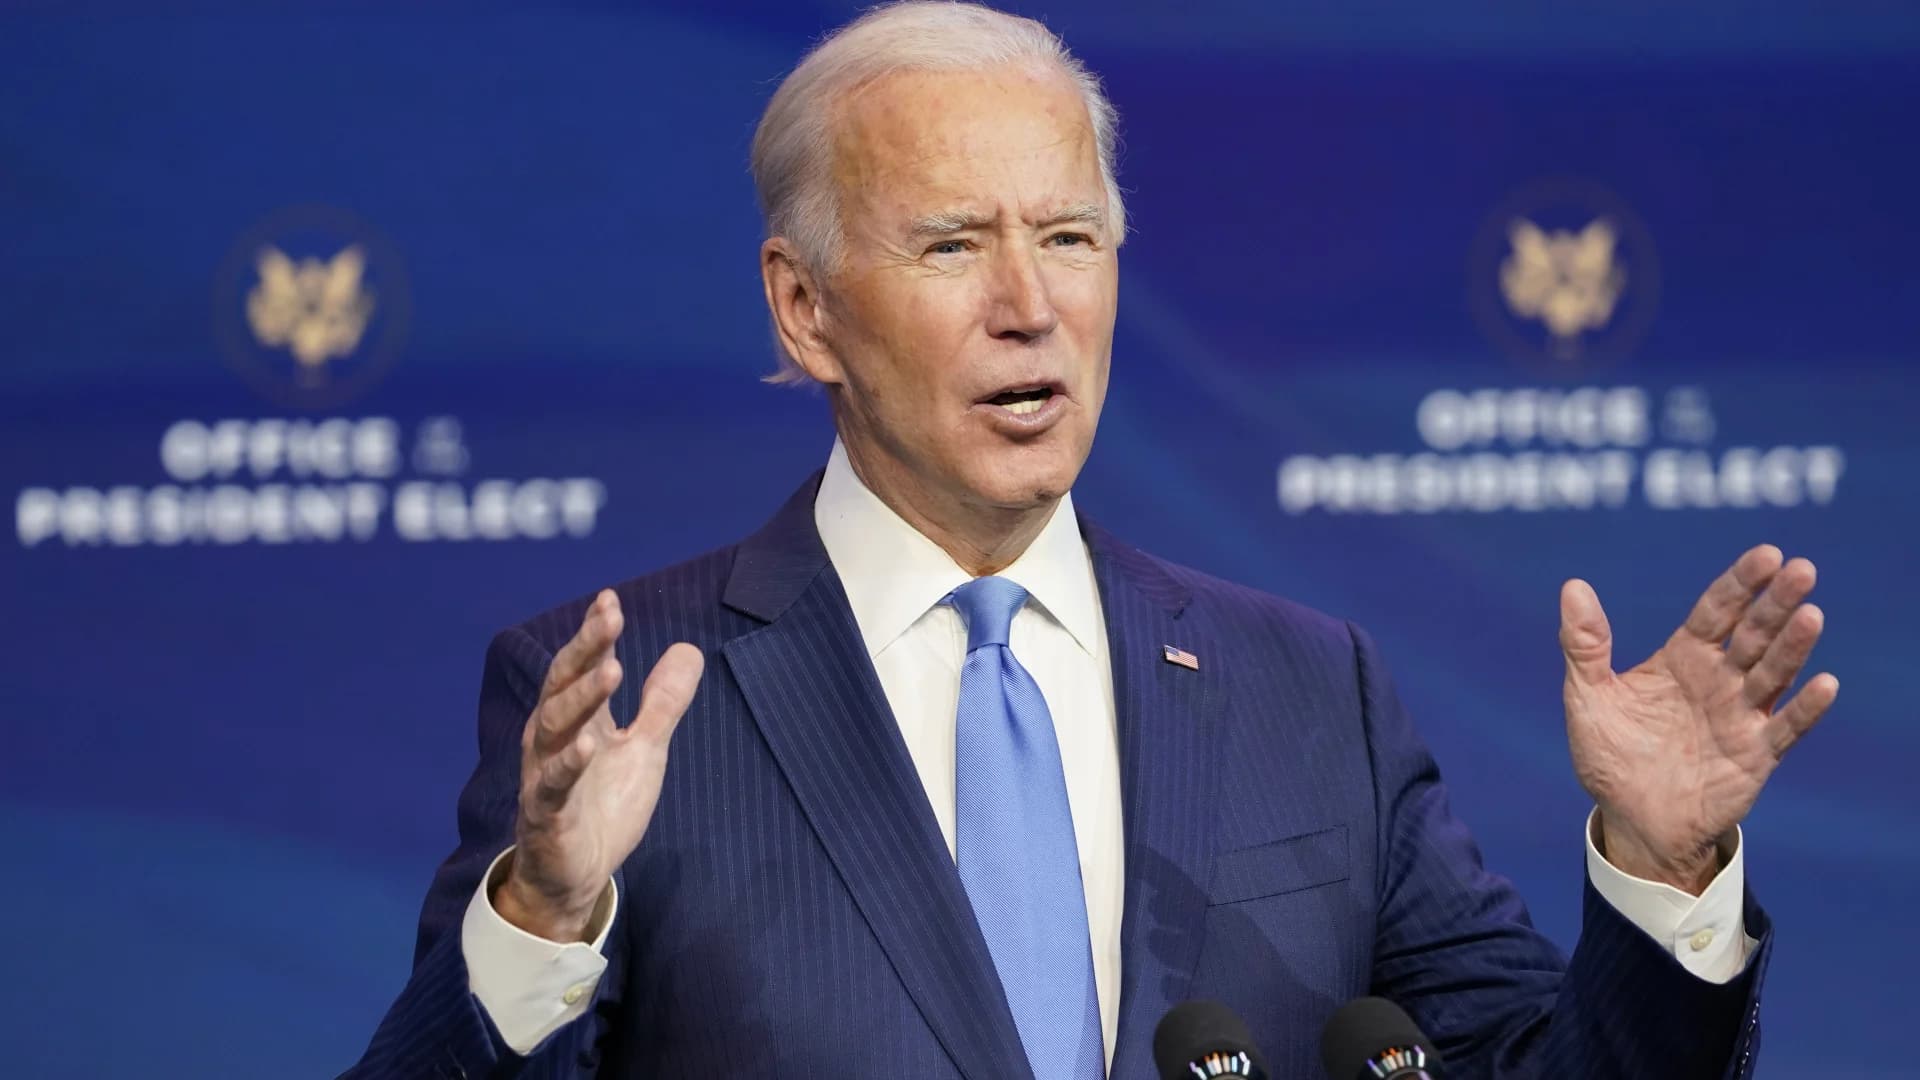 ‘Democracy prevailed’: Biden aims to unify divided nation as Electoral College formalizes his victory